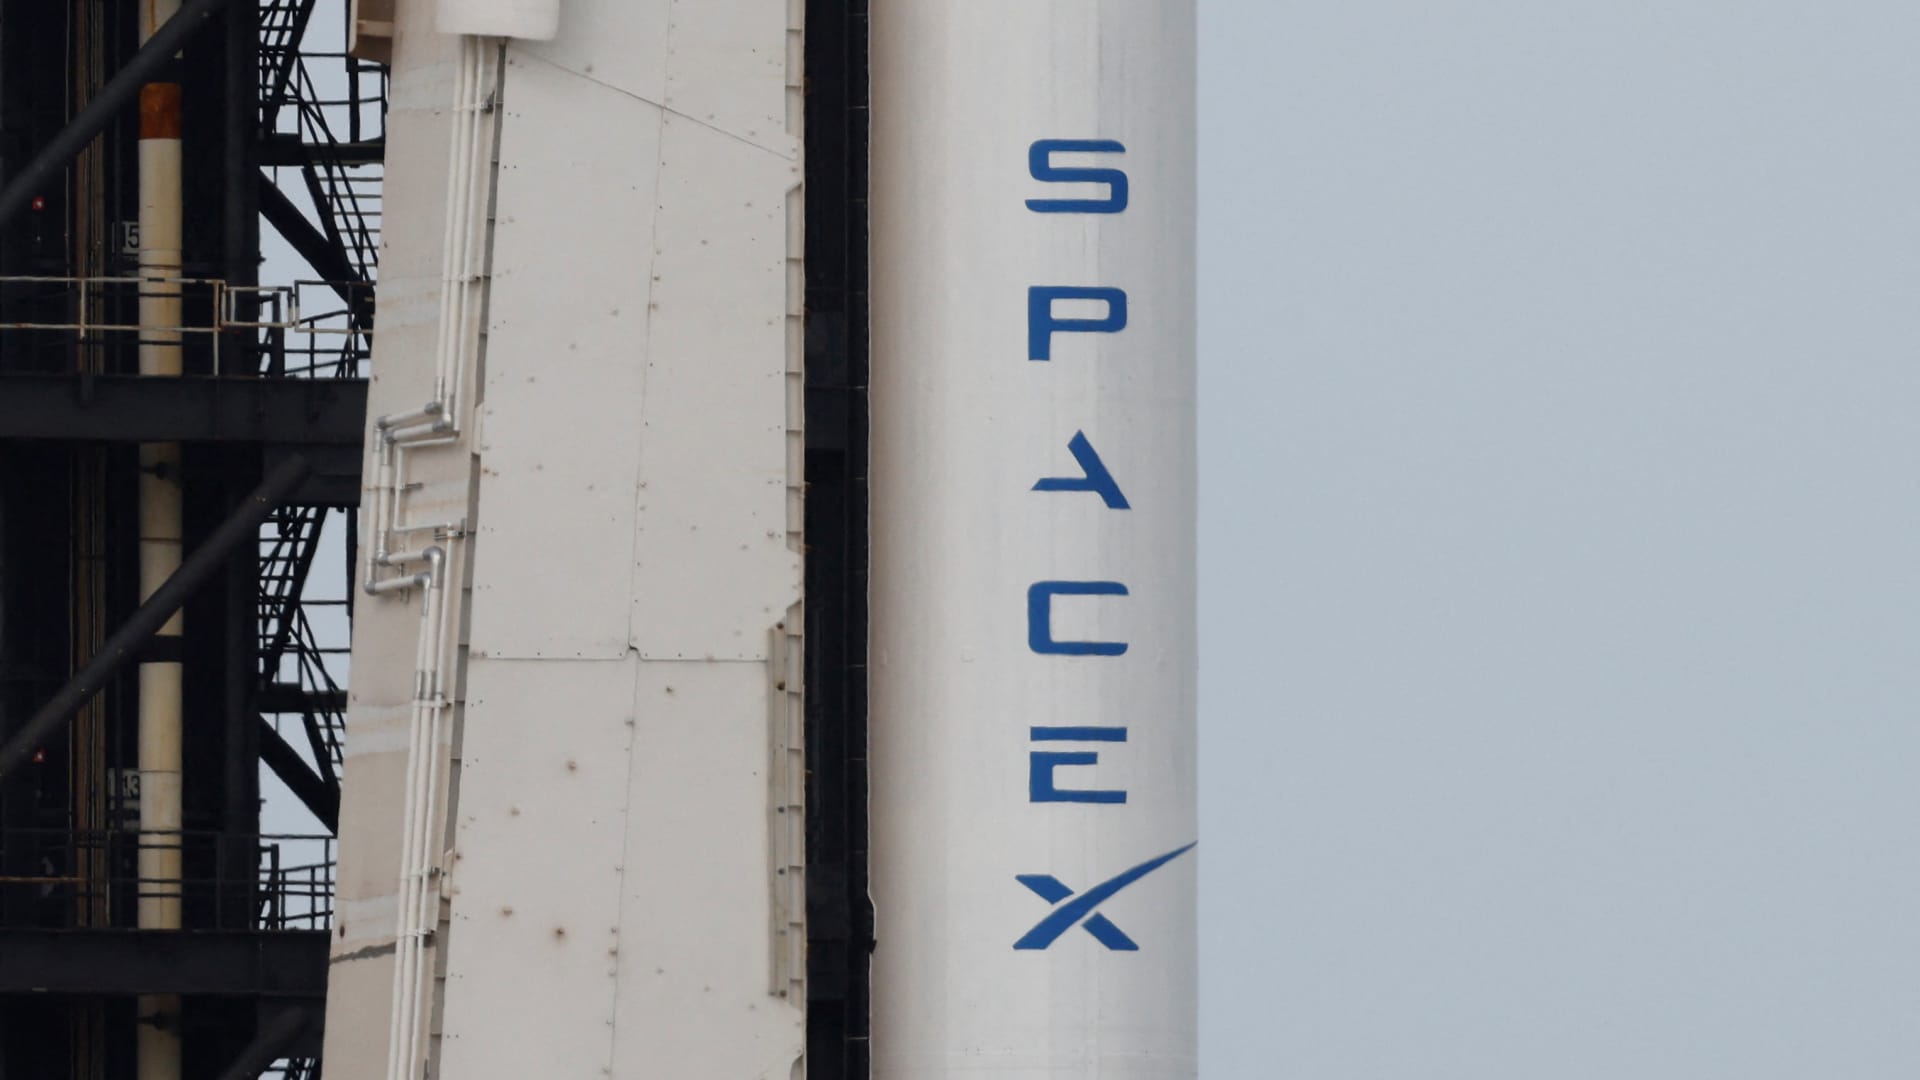 Elon Musk’s SpaceX hit with NLRB complaint over severance